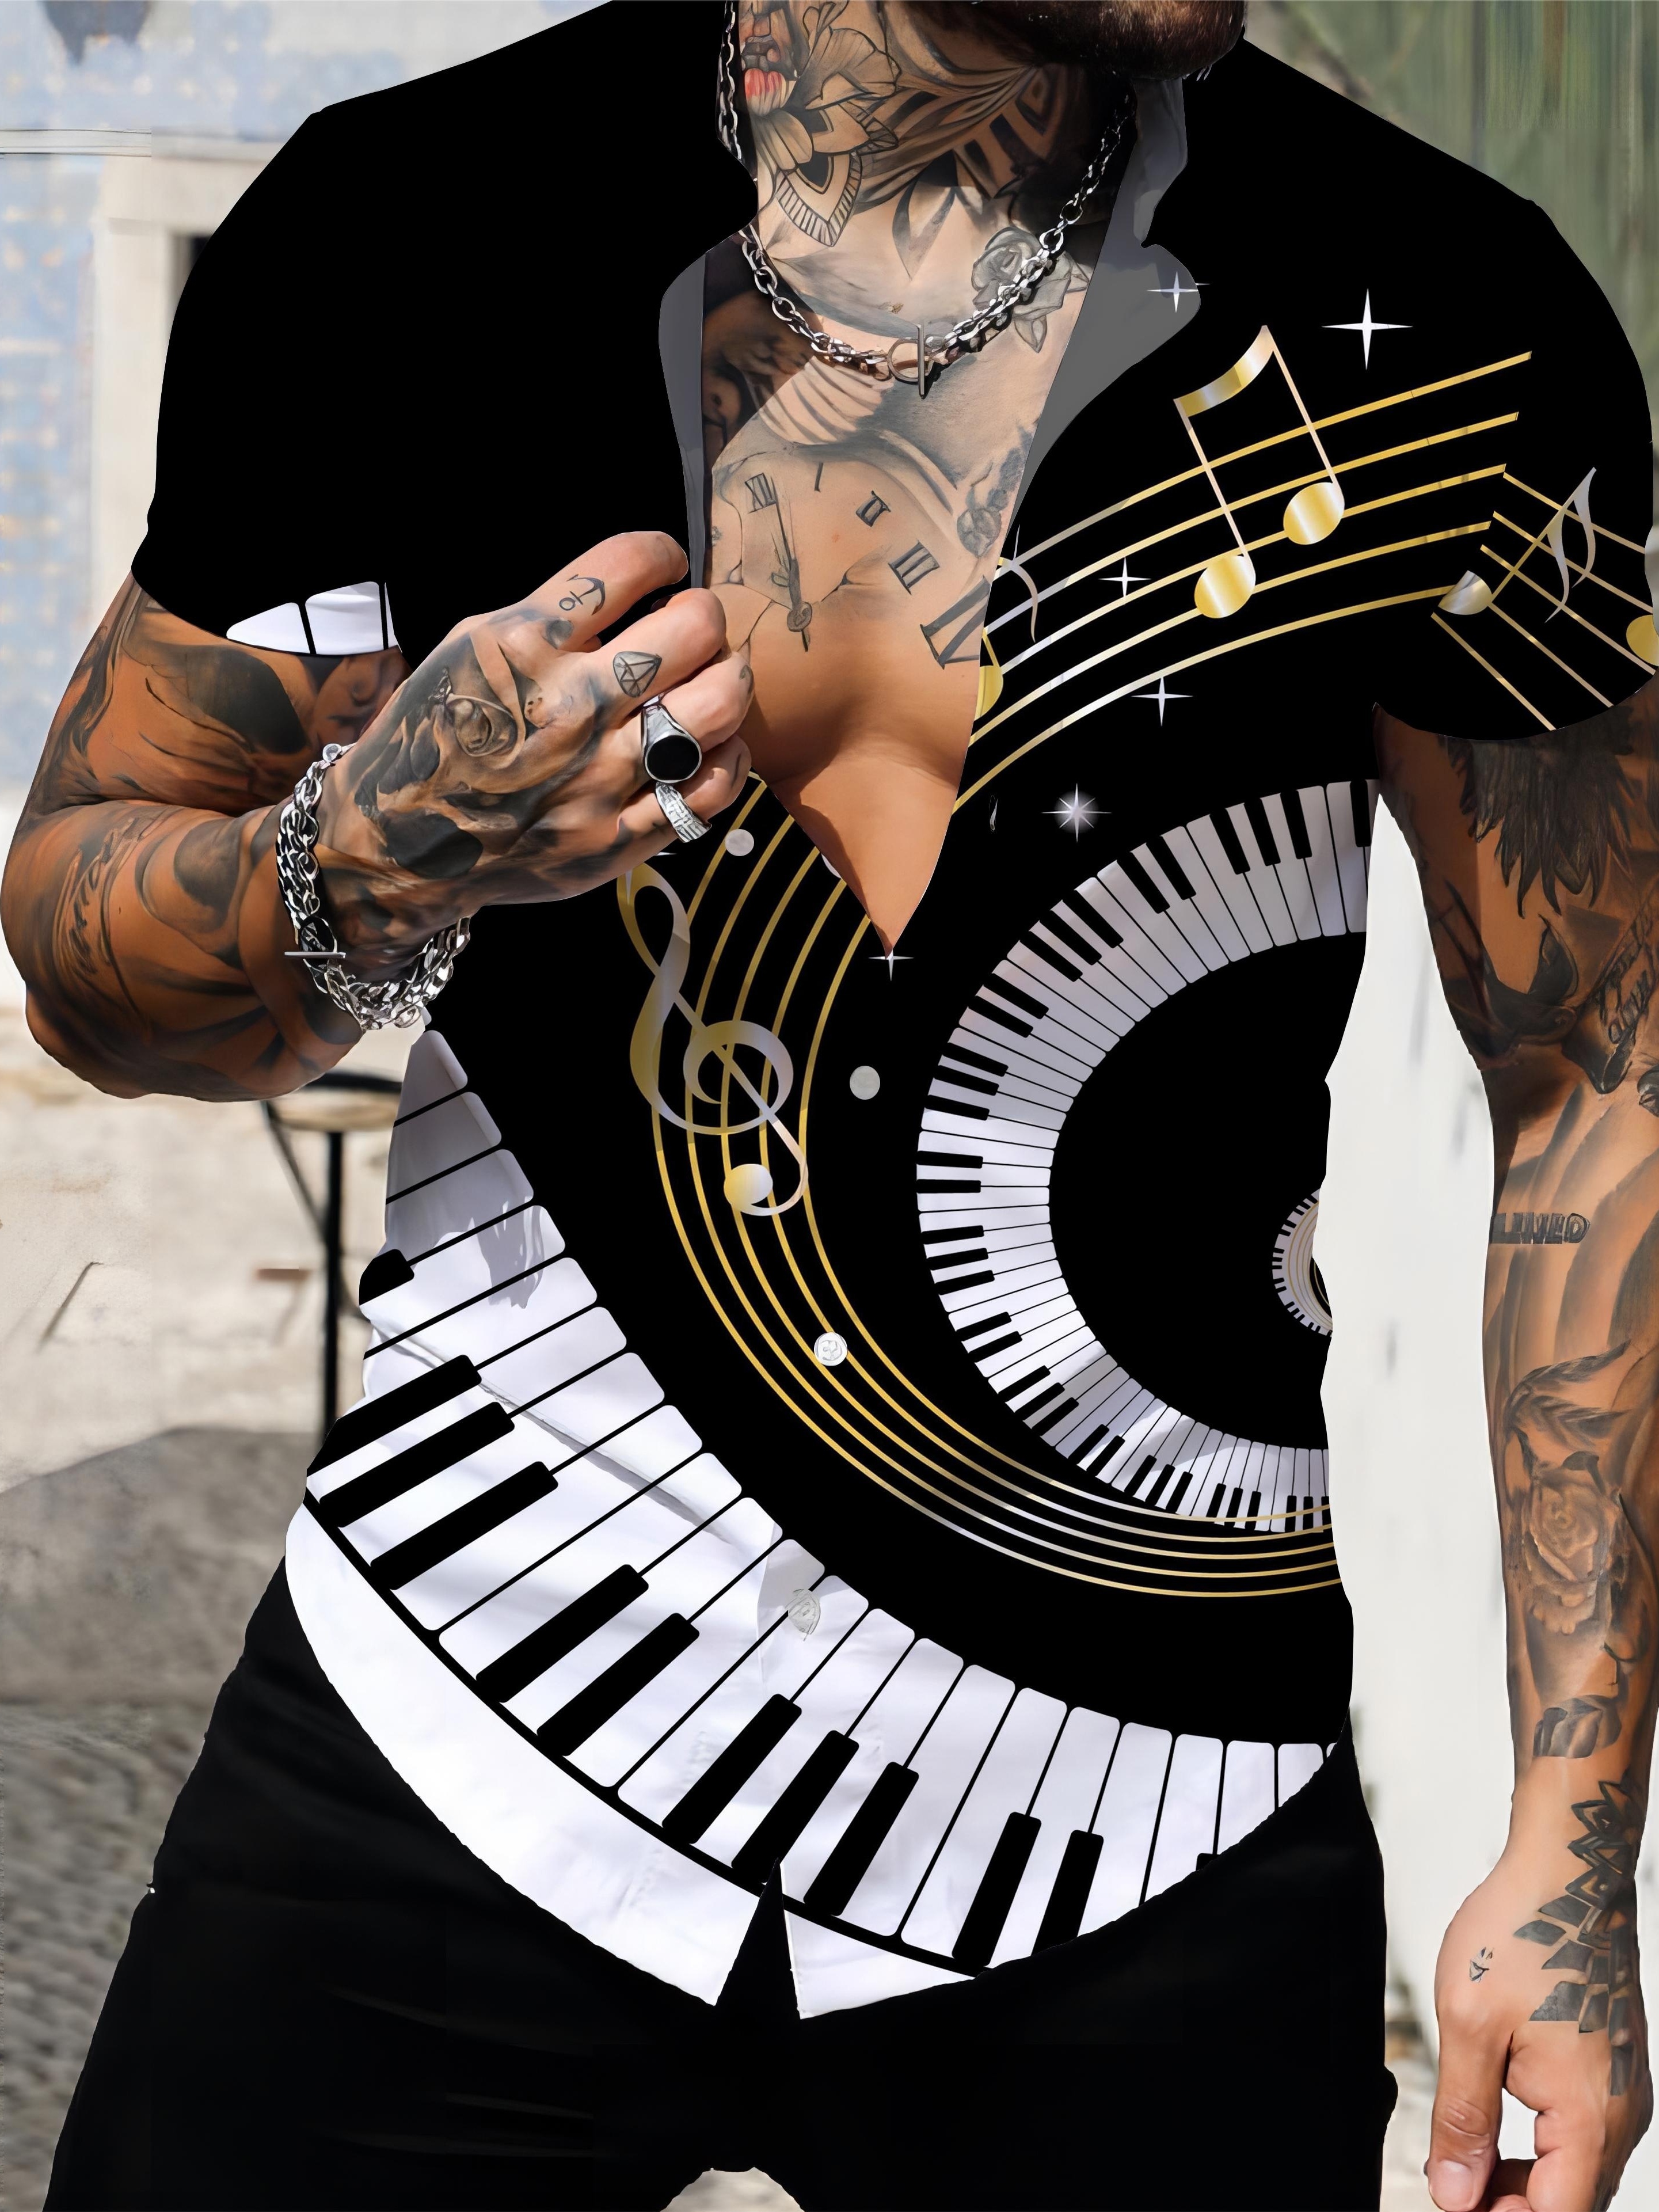 Men's Piano Music 3D Print Fashion Short Sleeve V-neck Button Down Shirts, Men's Summer Clothes, Casual Graphic Tops, Men's Novelty Pajamas Tops